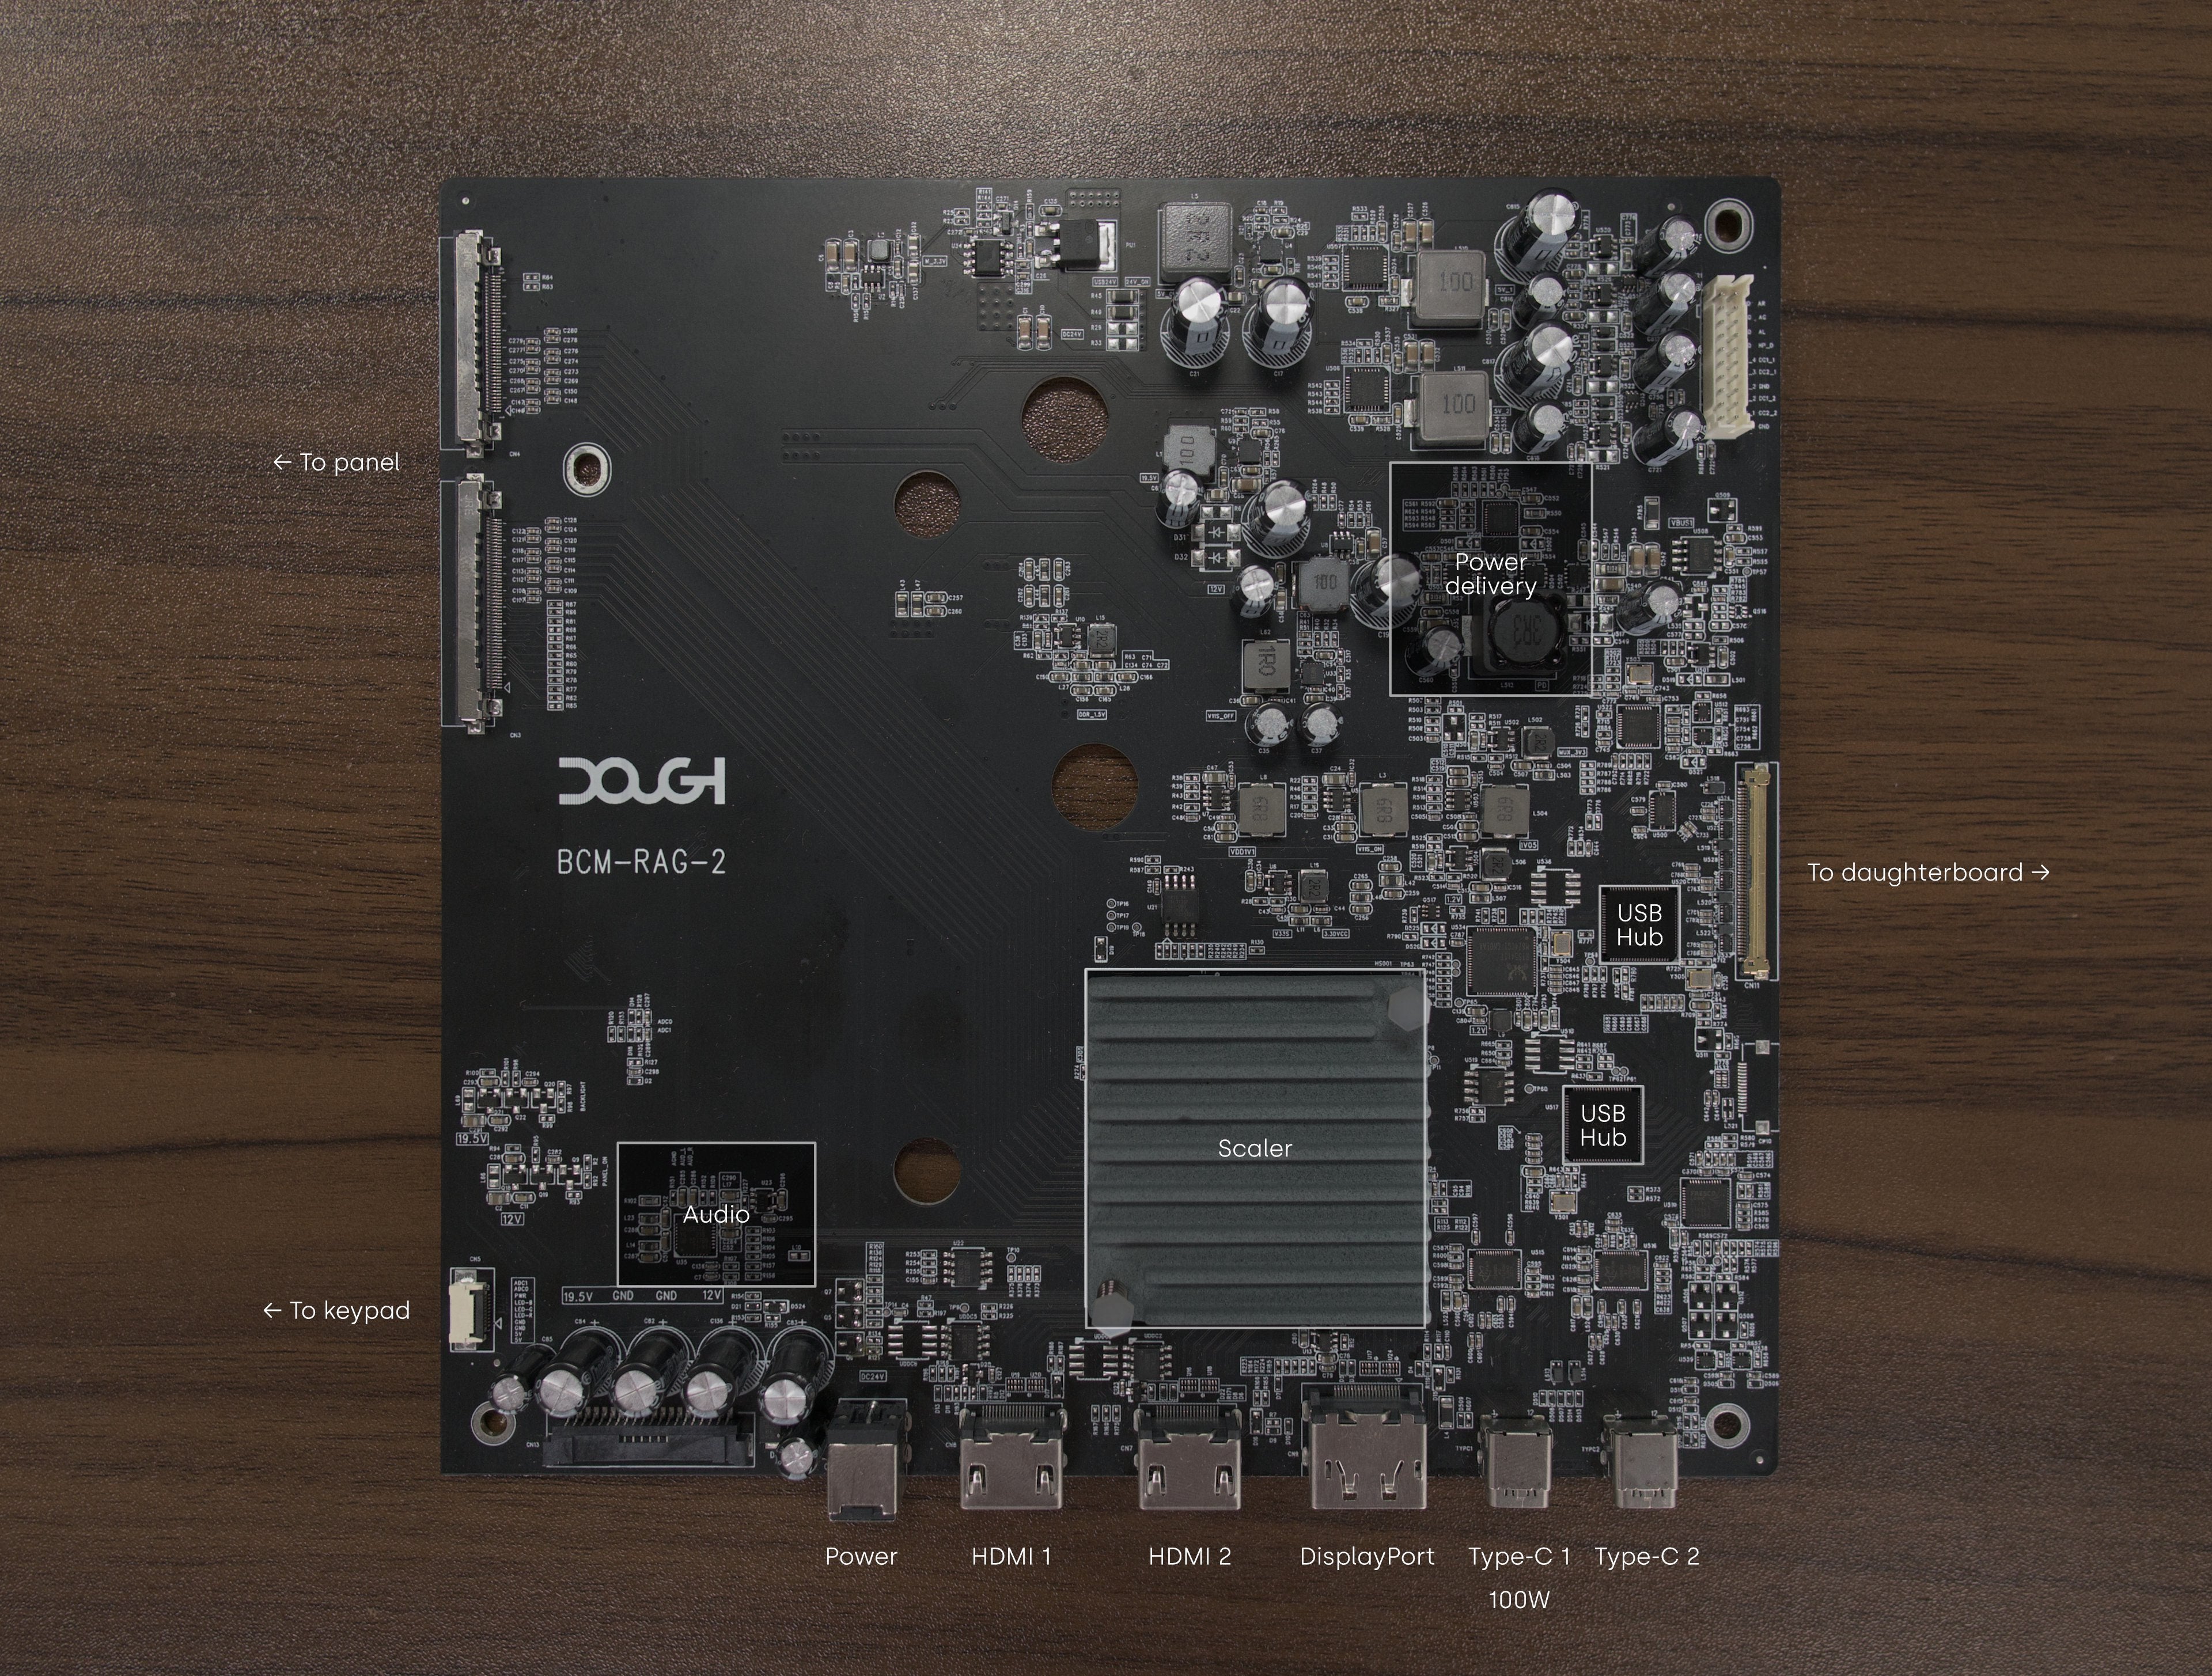 Even motherboard is black on Spectrum Black: New round of motherboards is in. Motherboard progress over time. Sub-pixel Shots and enhanced content clarity with glass and more...